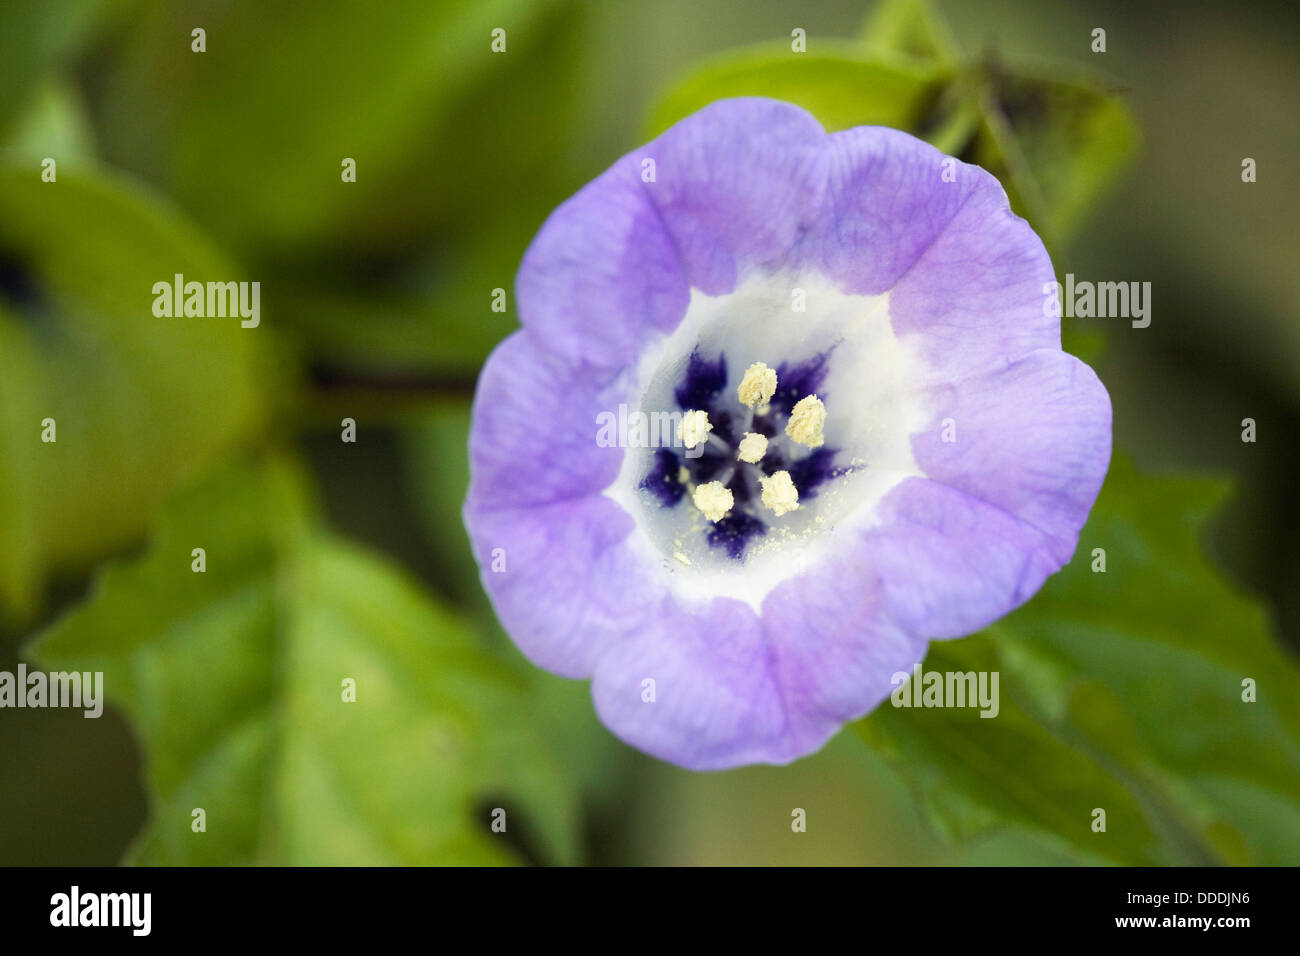 Nicandra physalodes. Shoo-fly plant flower. Stock Photo